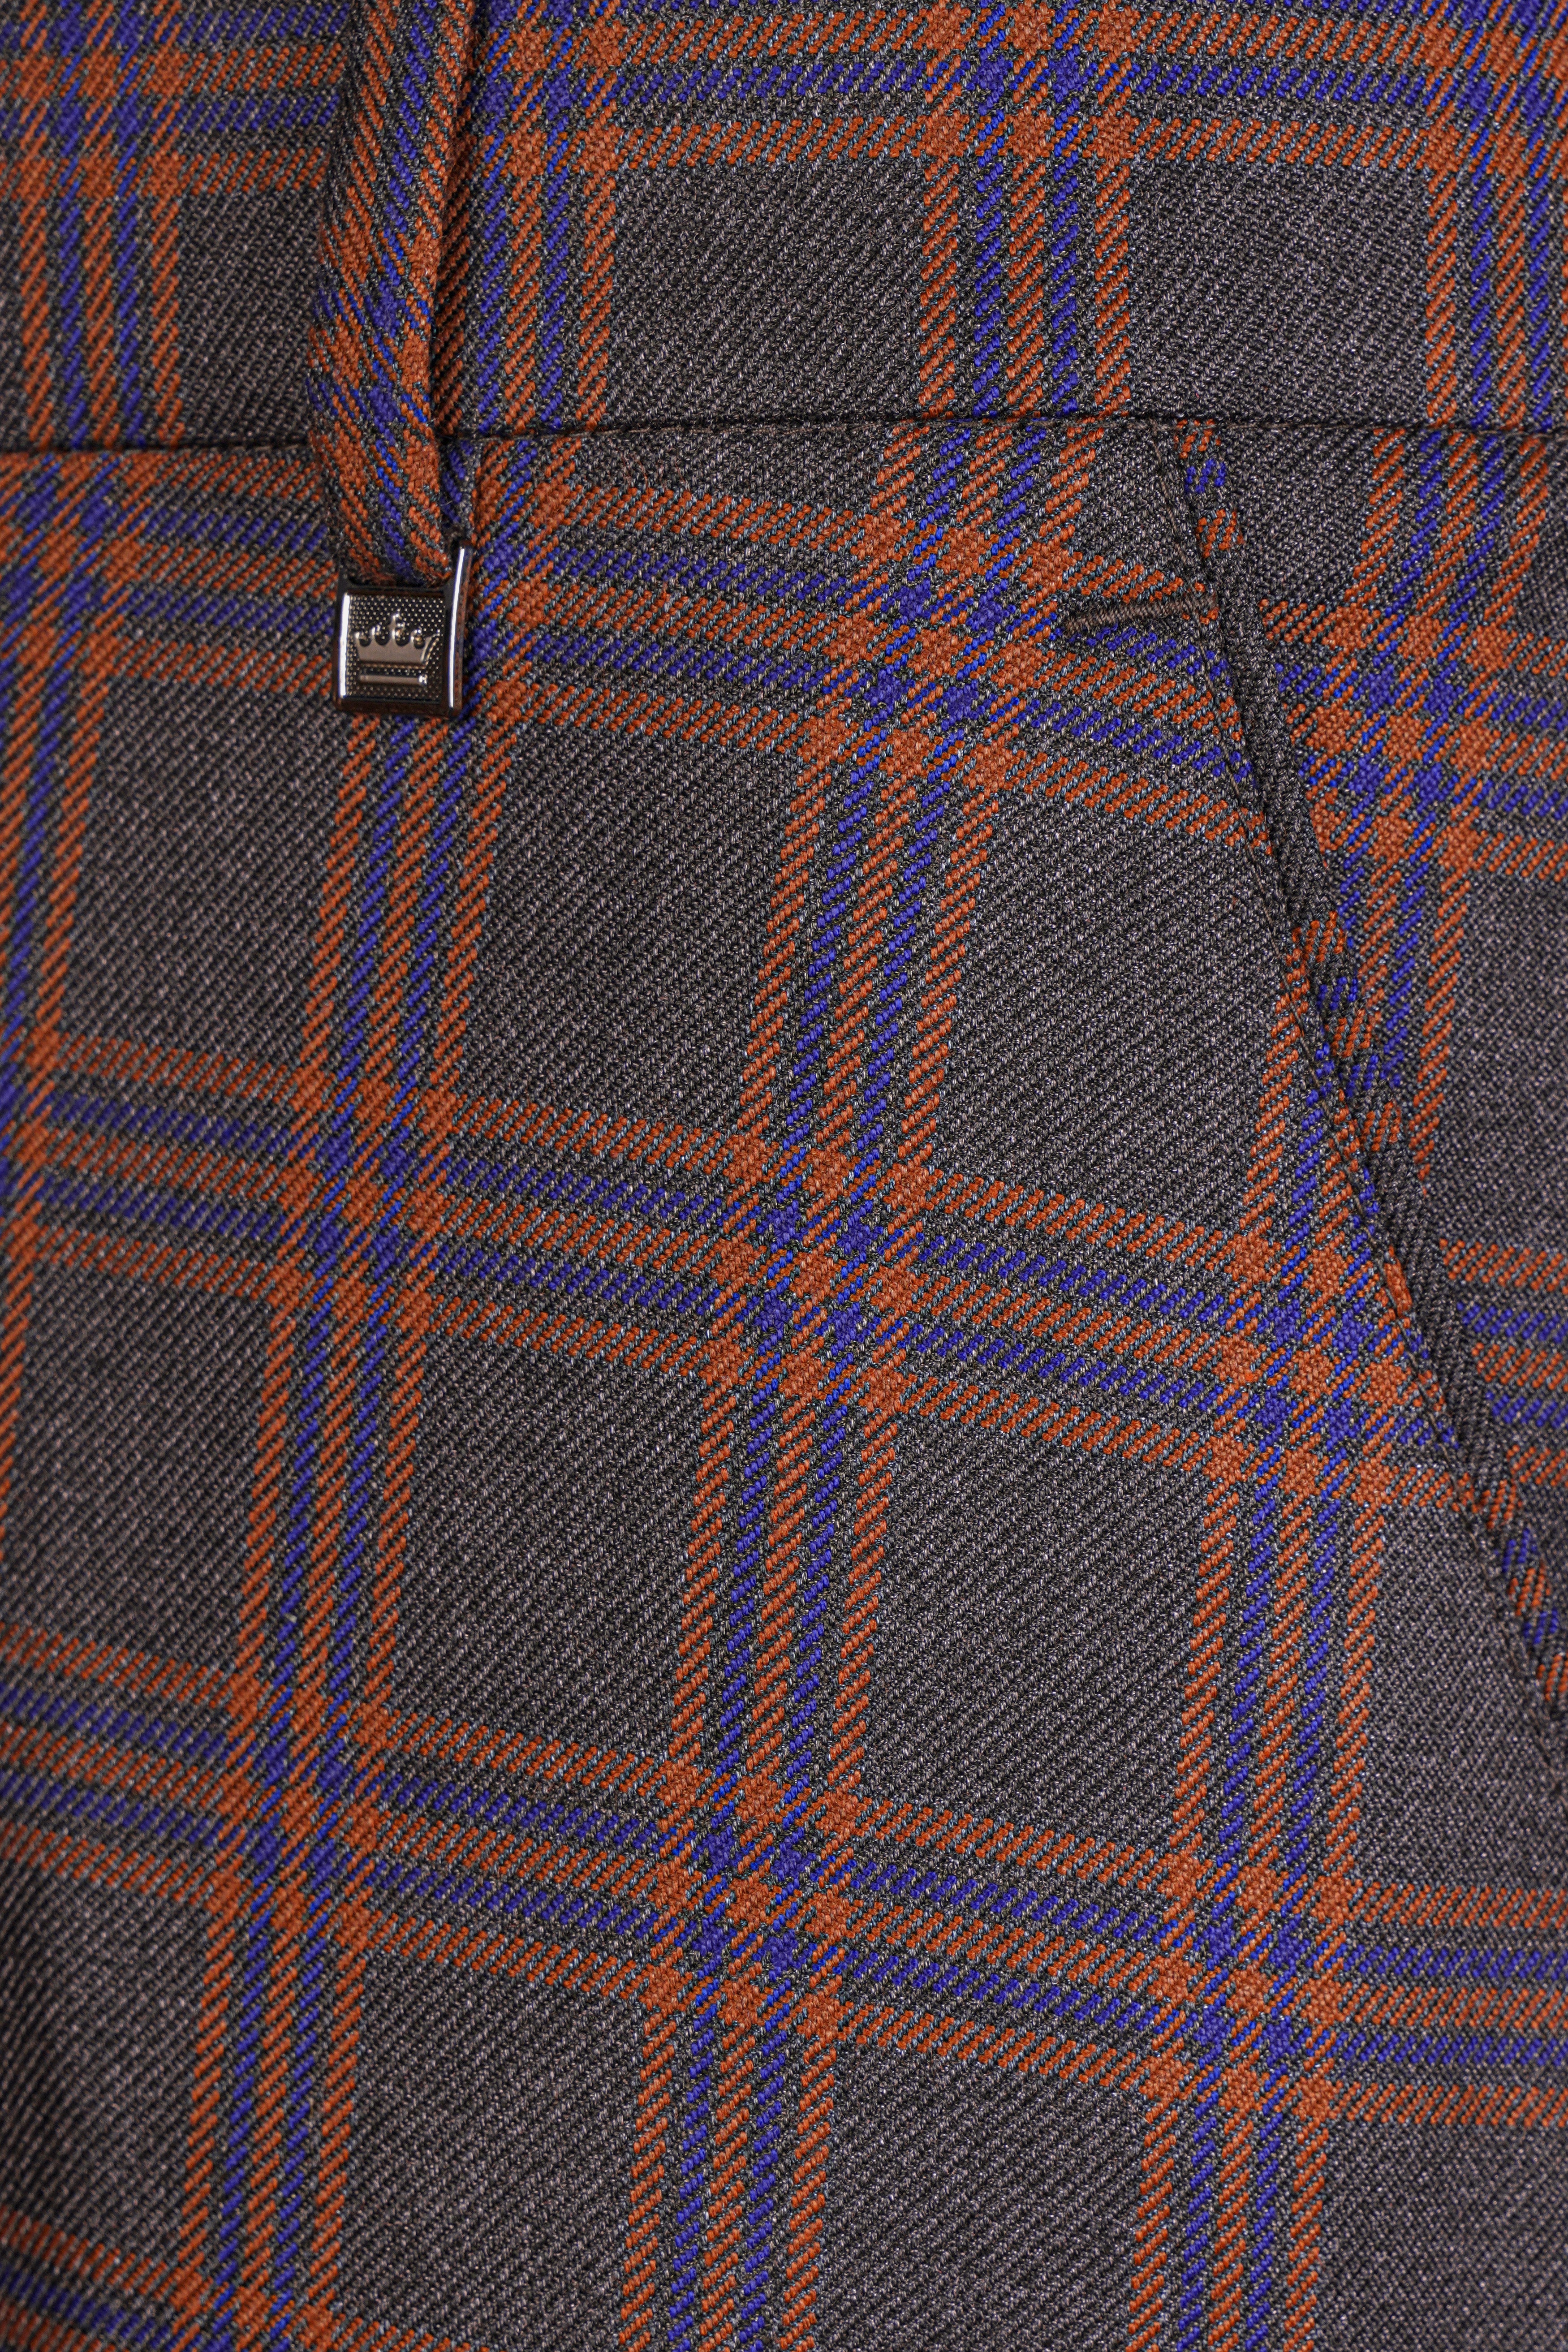 Emperor Gray and Russet Brown Plaid Tweed Pant